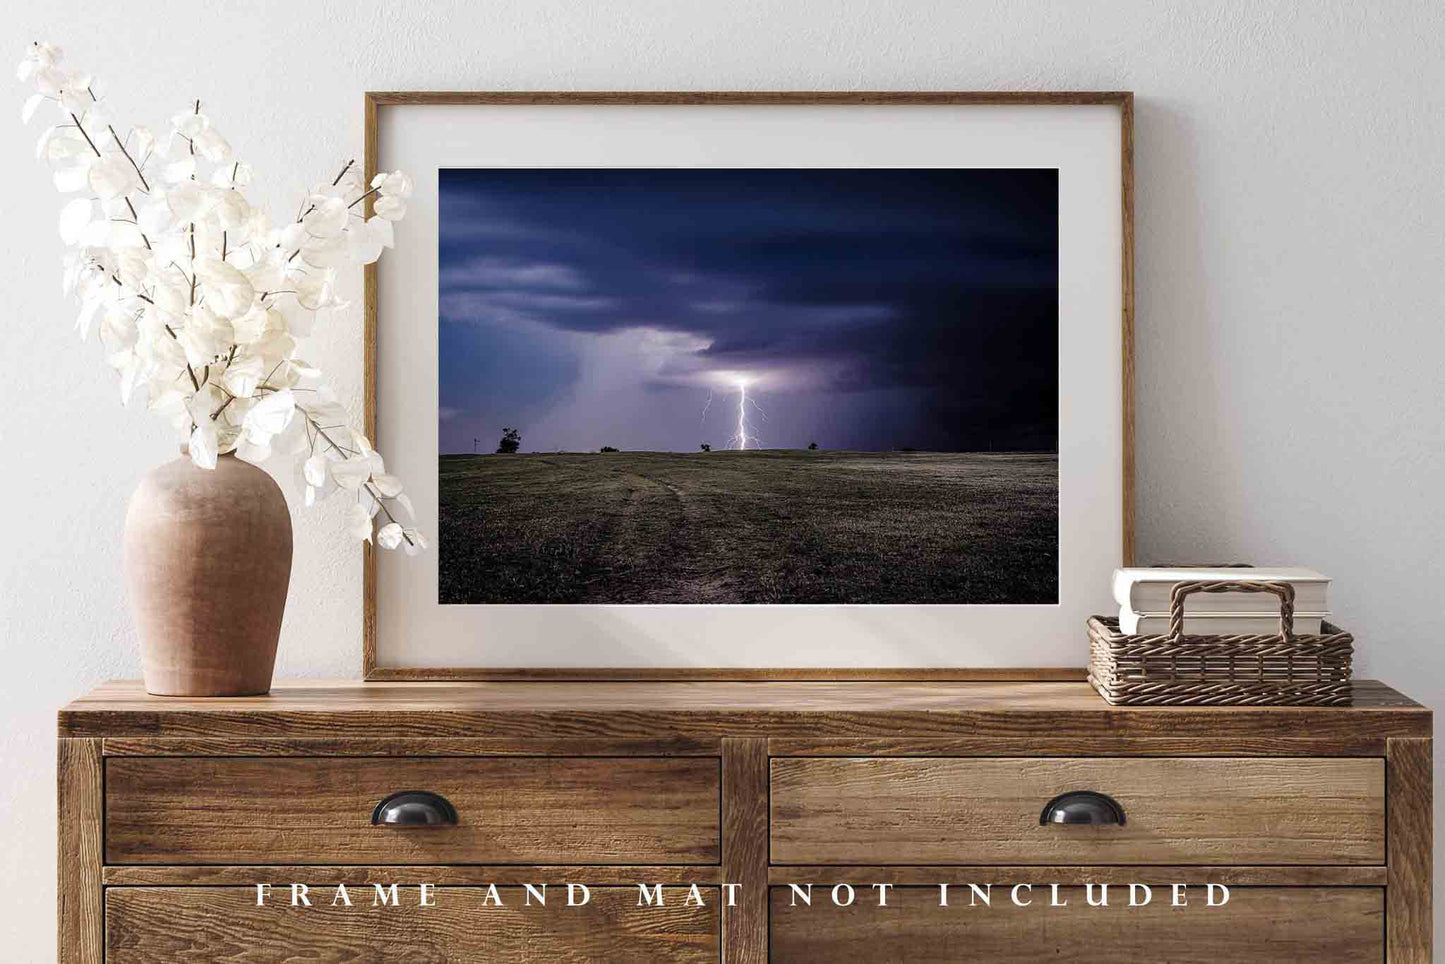 Storm Photography Print - Picture of Lightning Bolt on Stormy Night in Oklahoma - Weather Wall Art Thunderstorm Sky Photo Artwork Decor